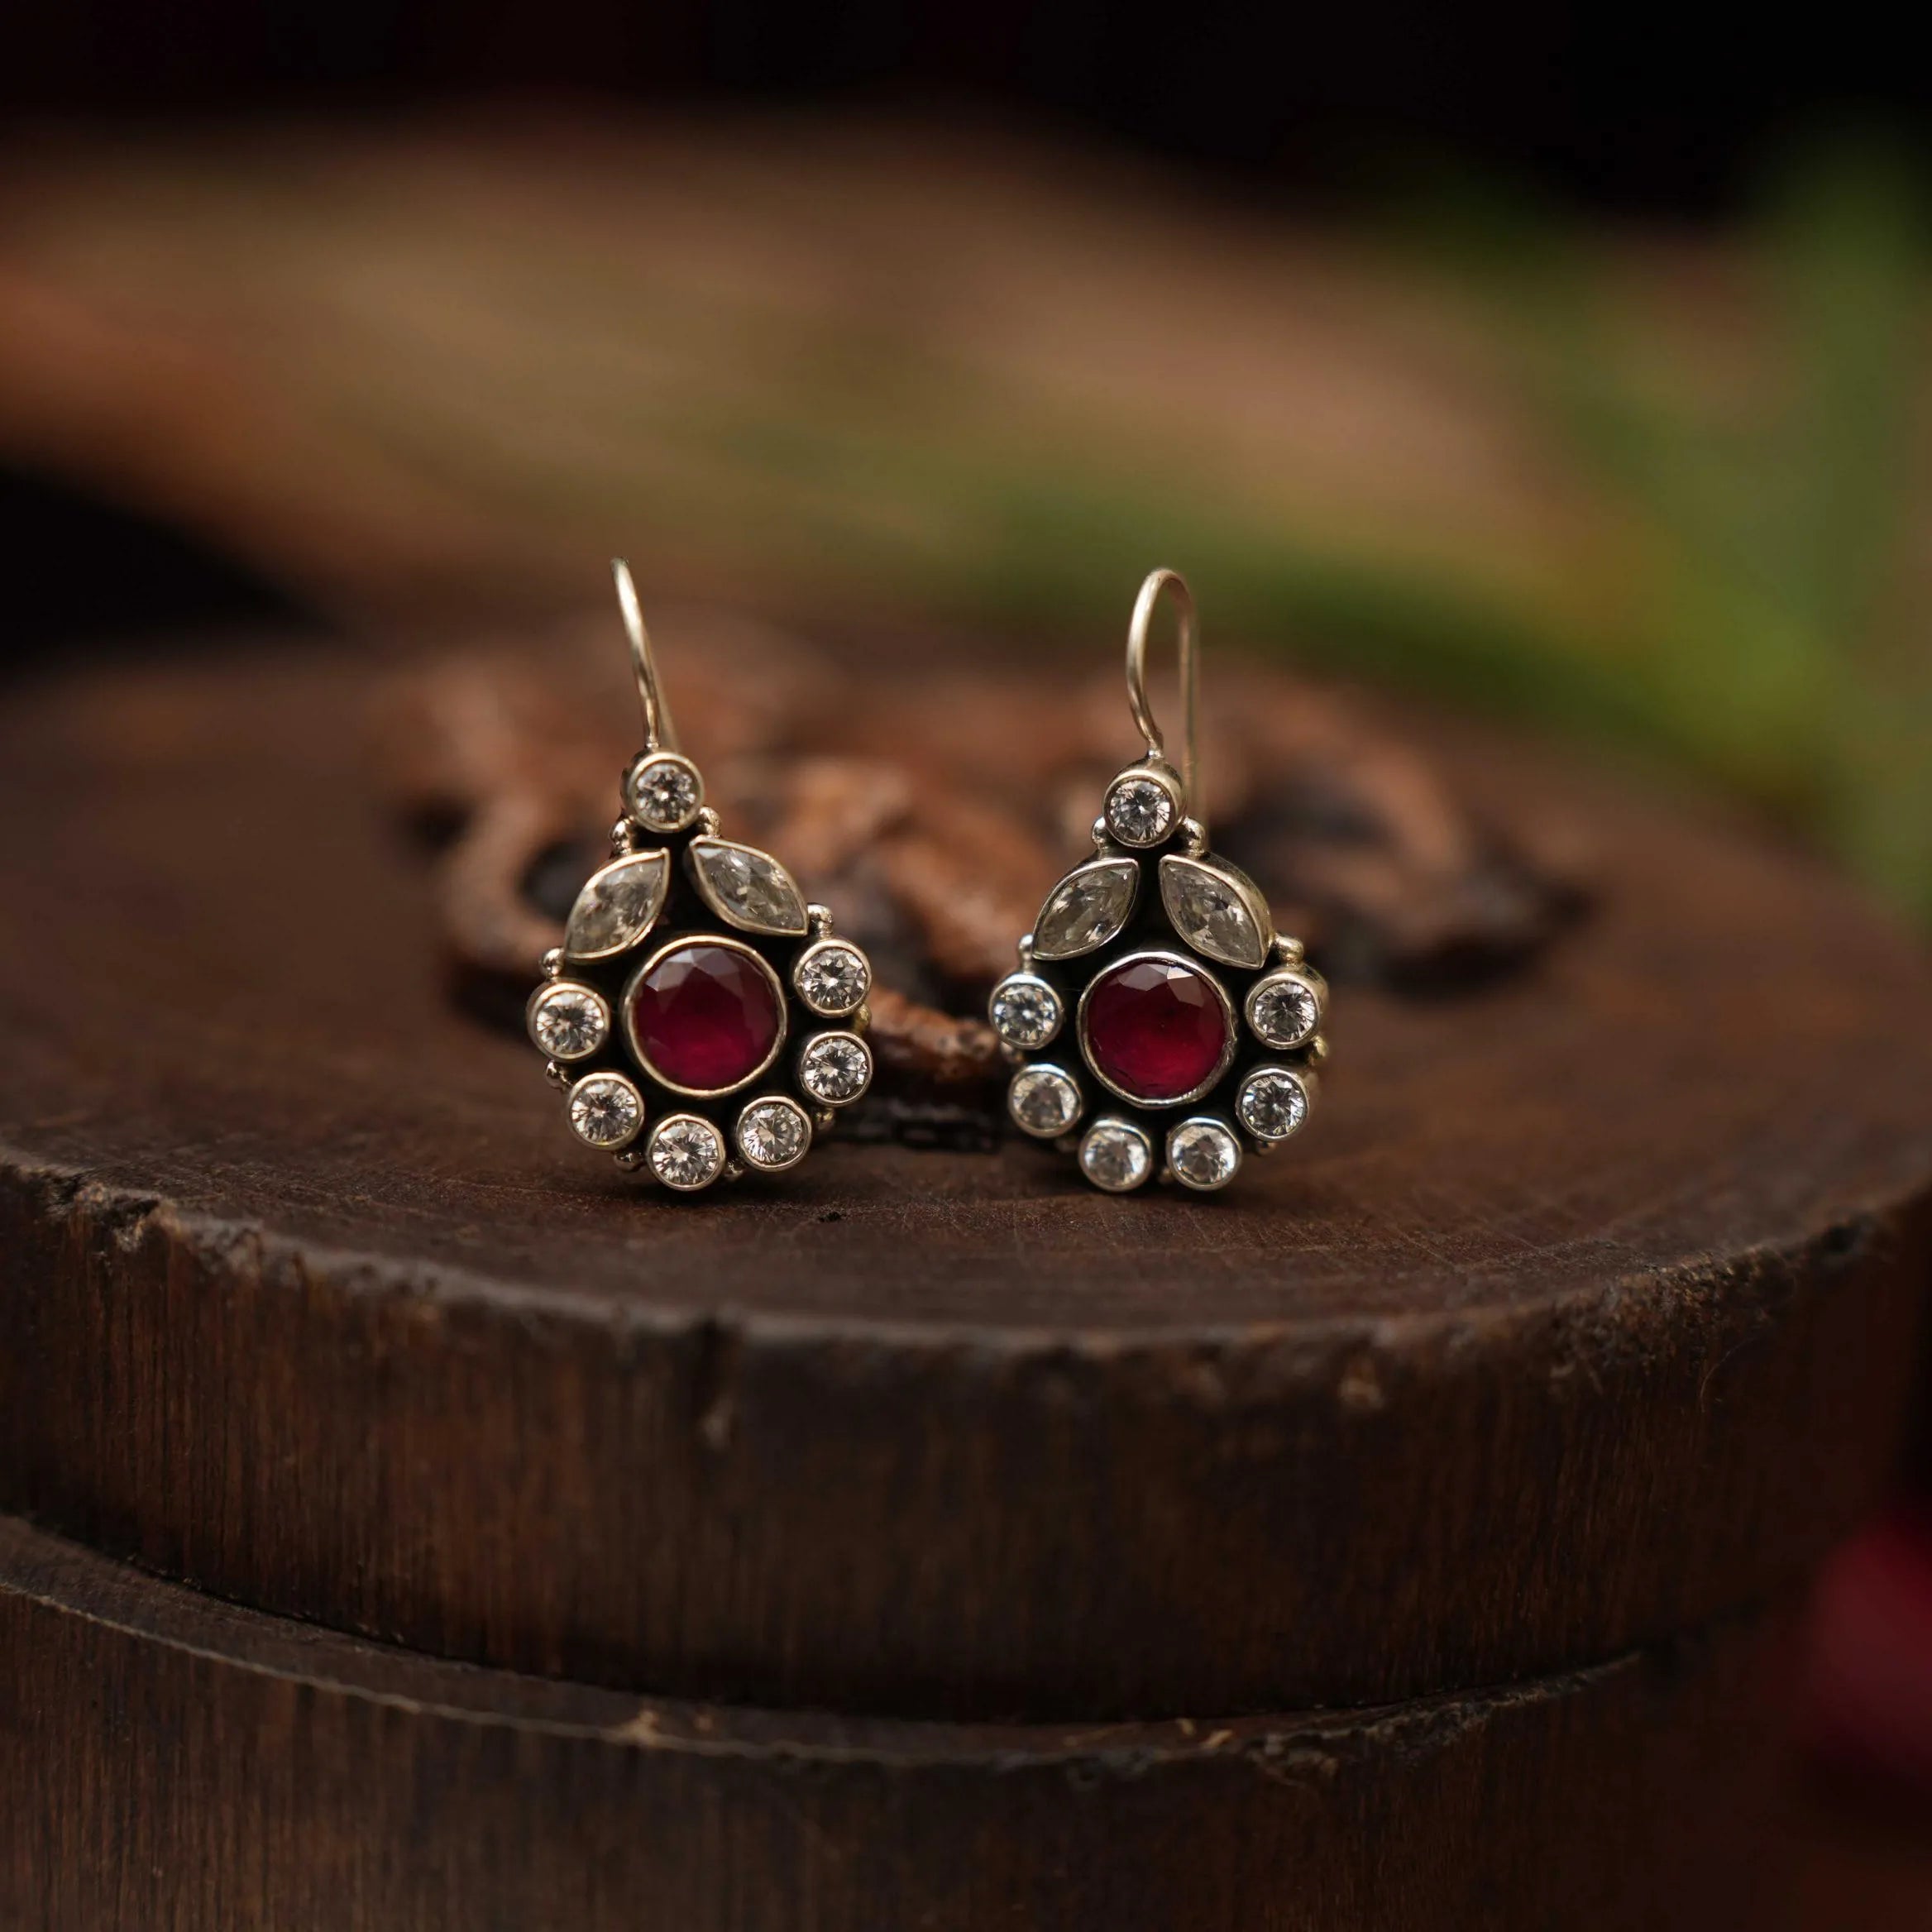 Misha Silver Oxidized Earrings - Red